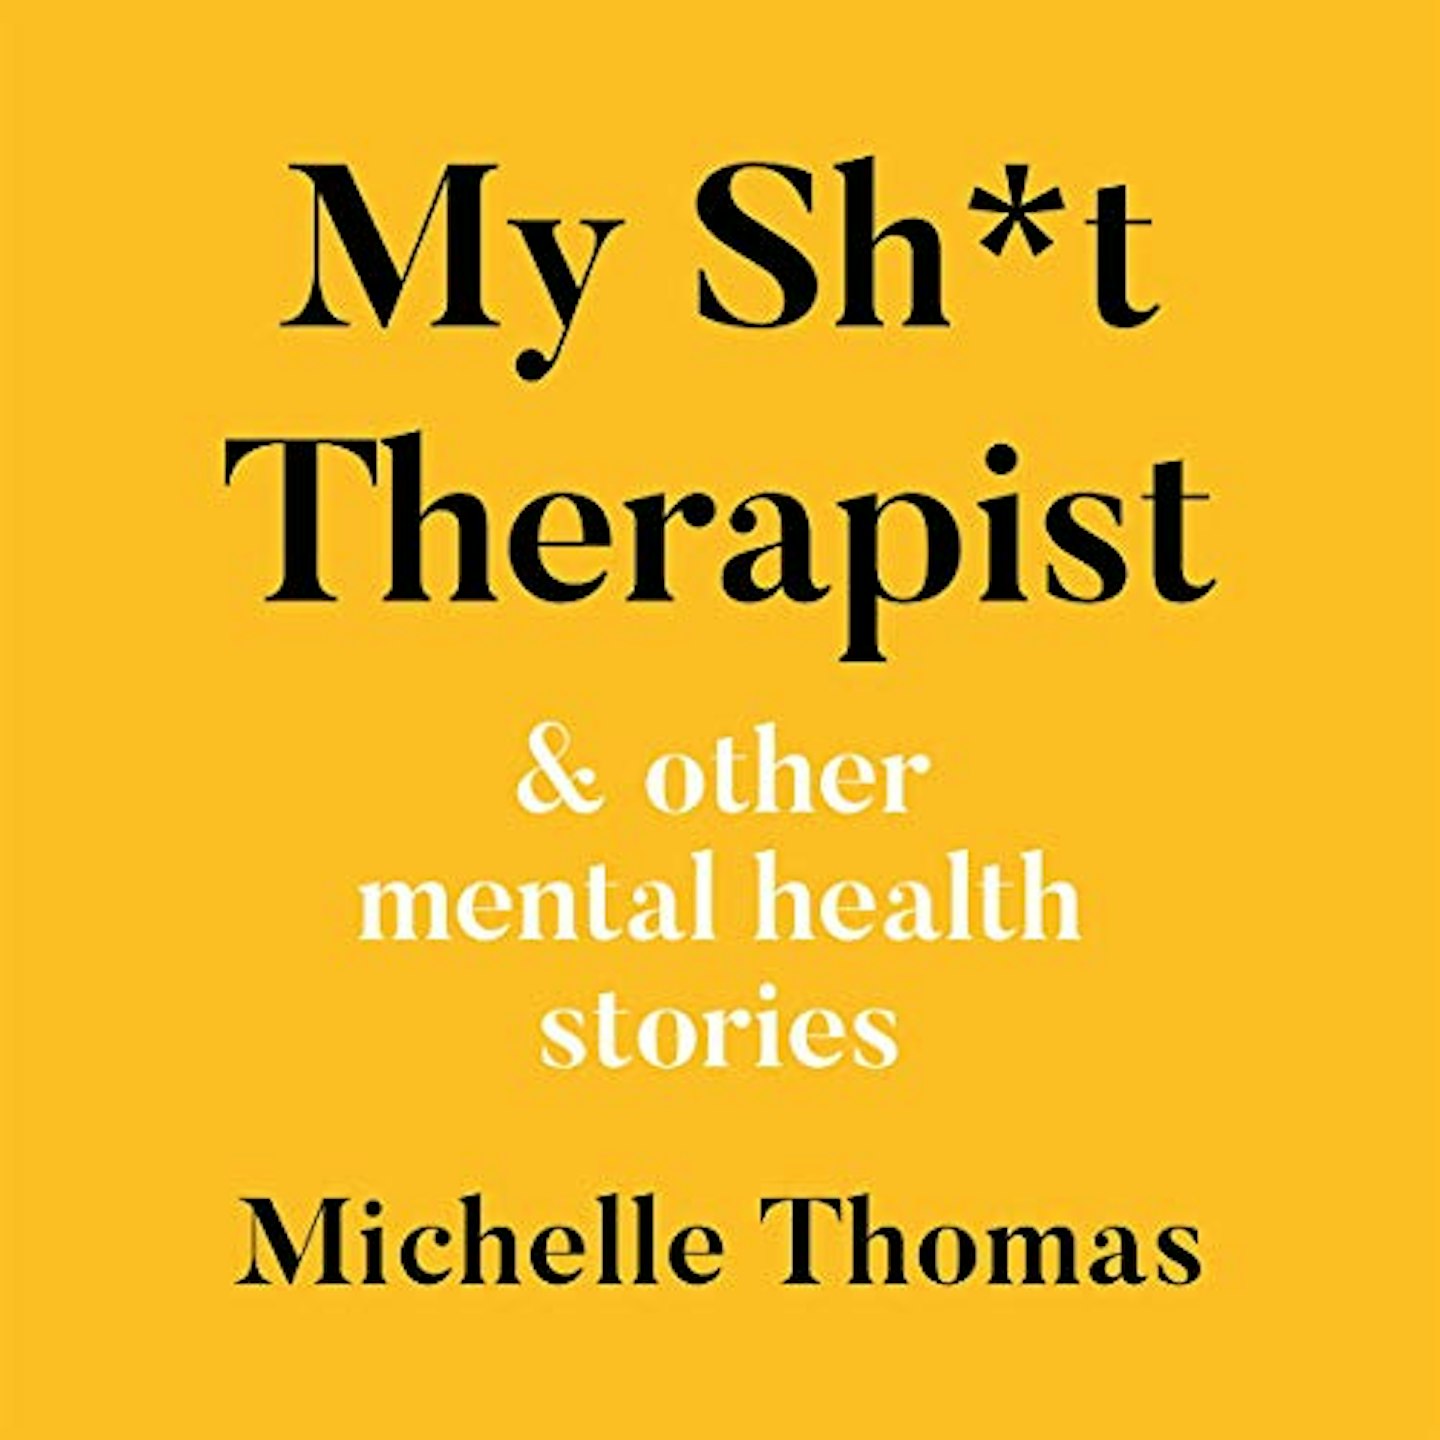 My Sh*t Therapist by Michelle Thomas